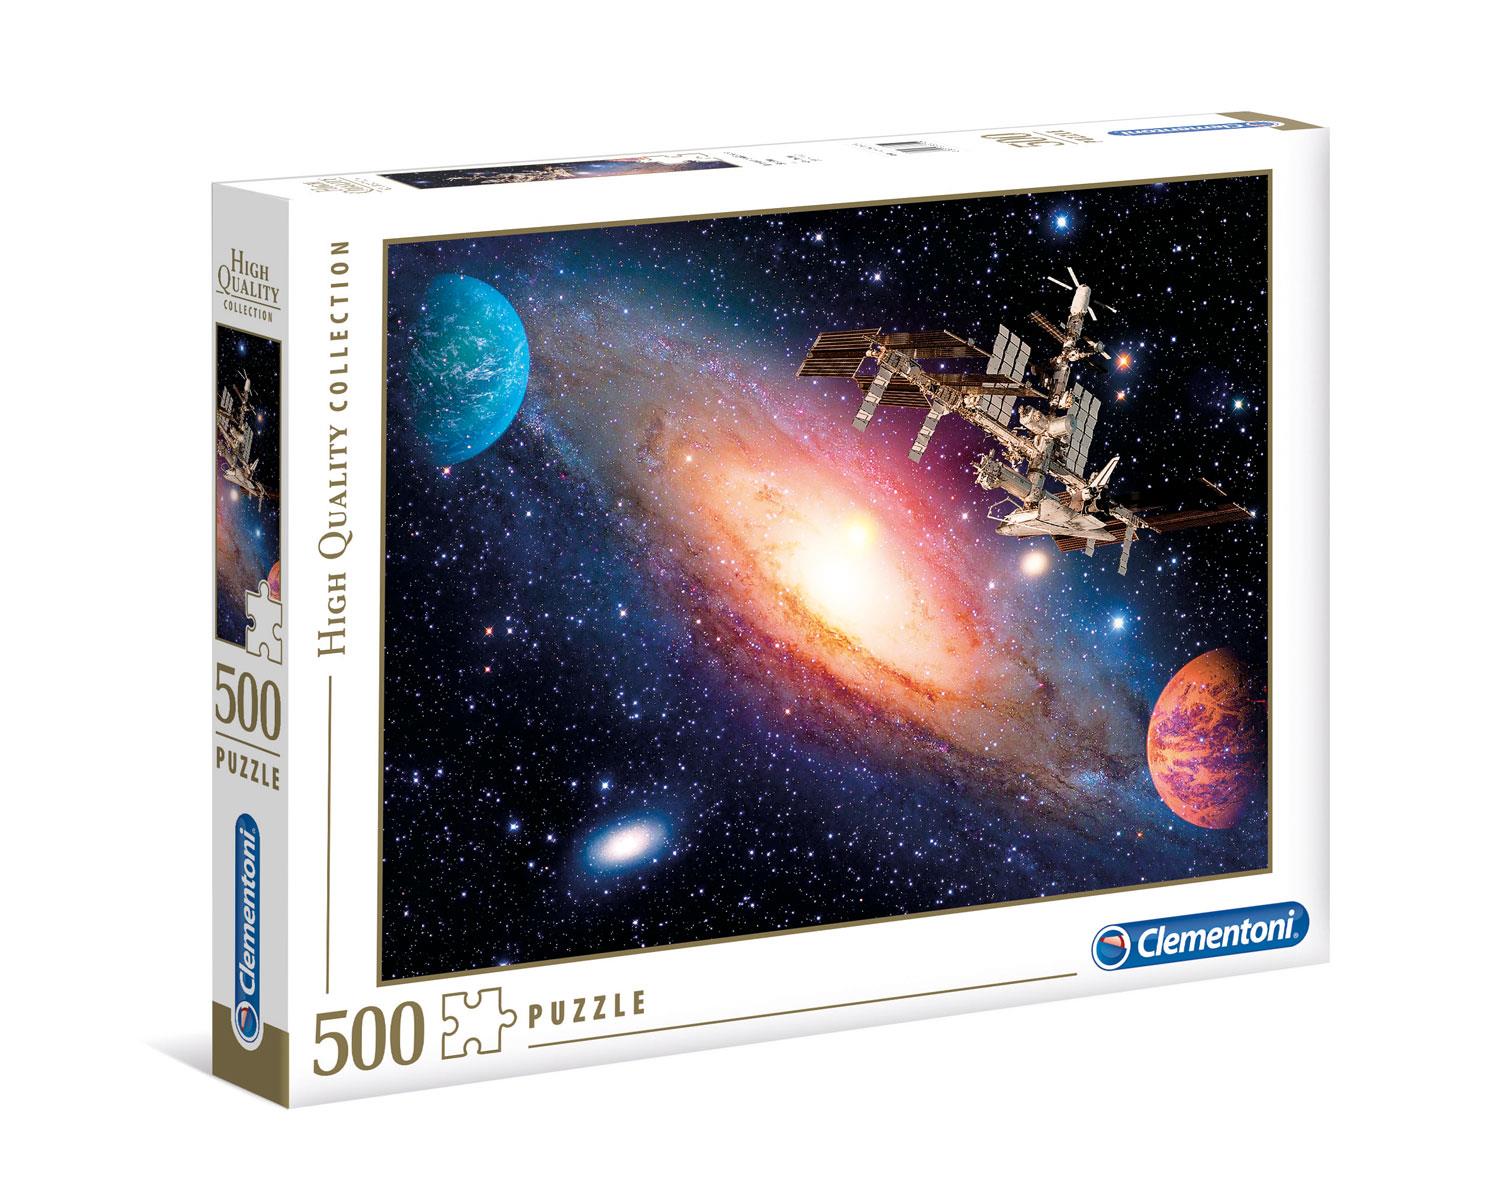 Clementoni International Space Station High Quality Jigsaw Puzzle (500 Pieces) - DAMAGED